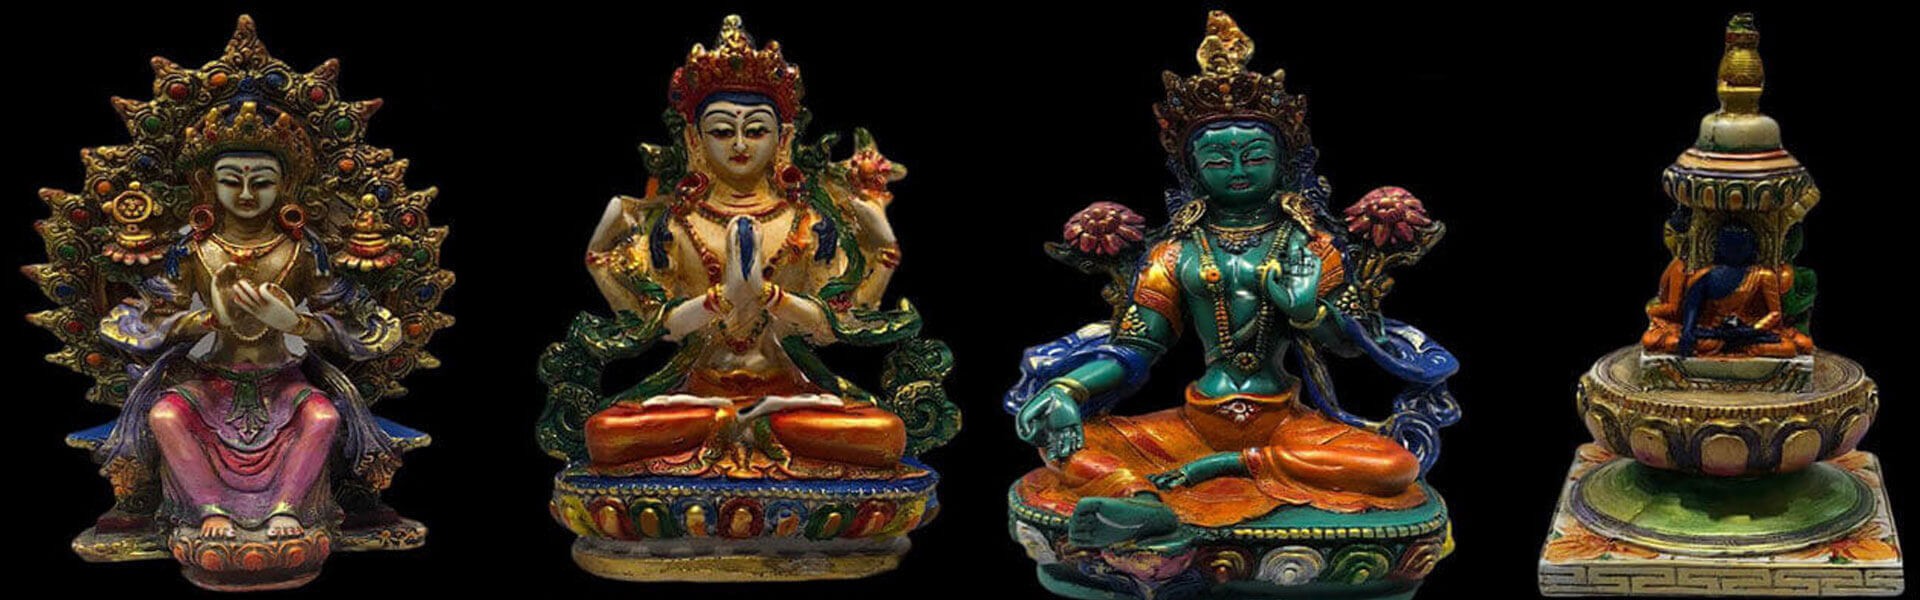 Nepal statues Product